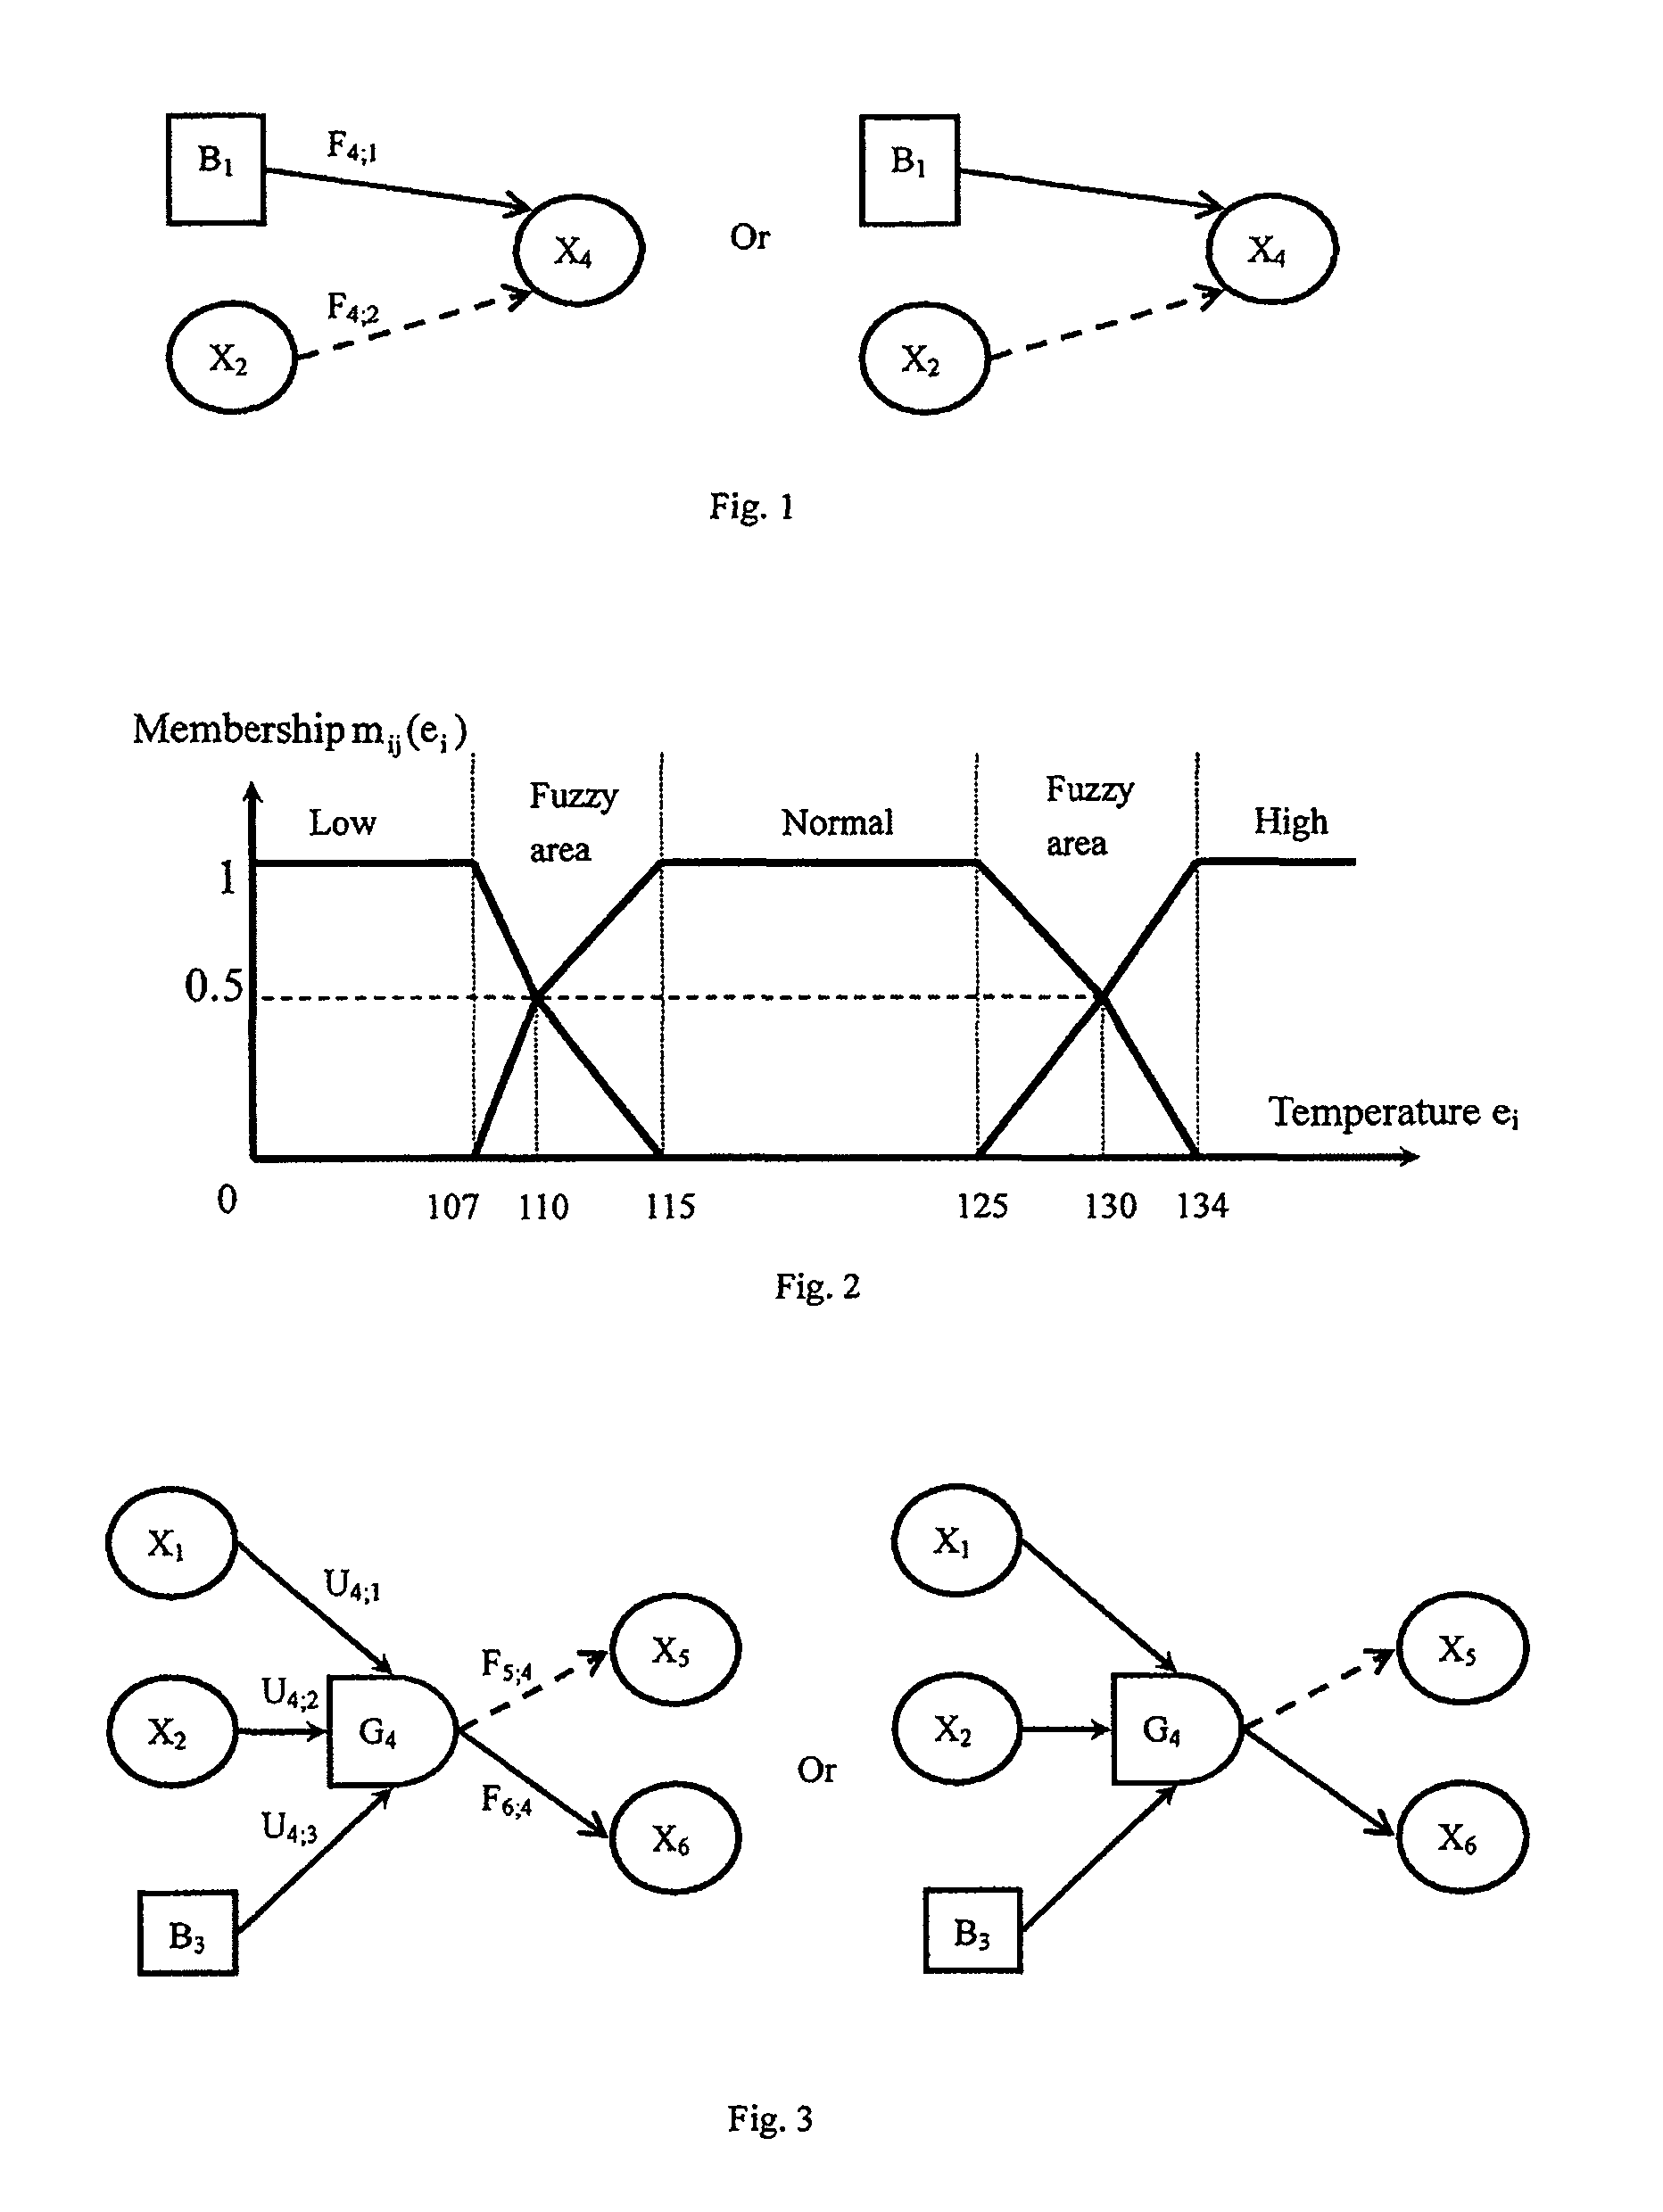 Method for constructing an intelligent system processing uncertain causal relationship information